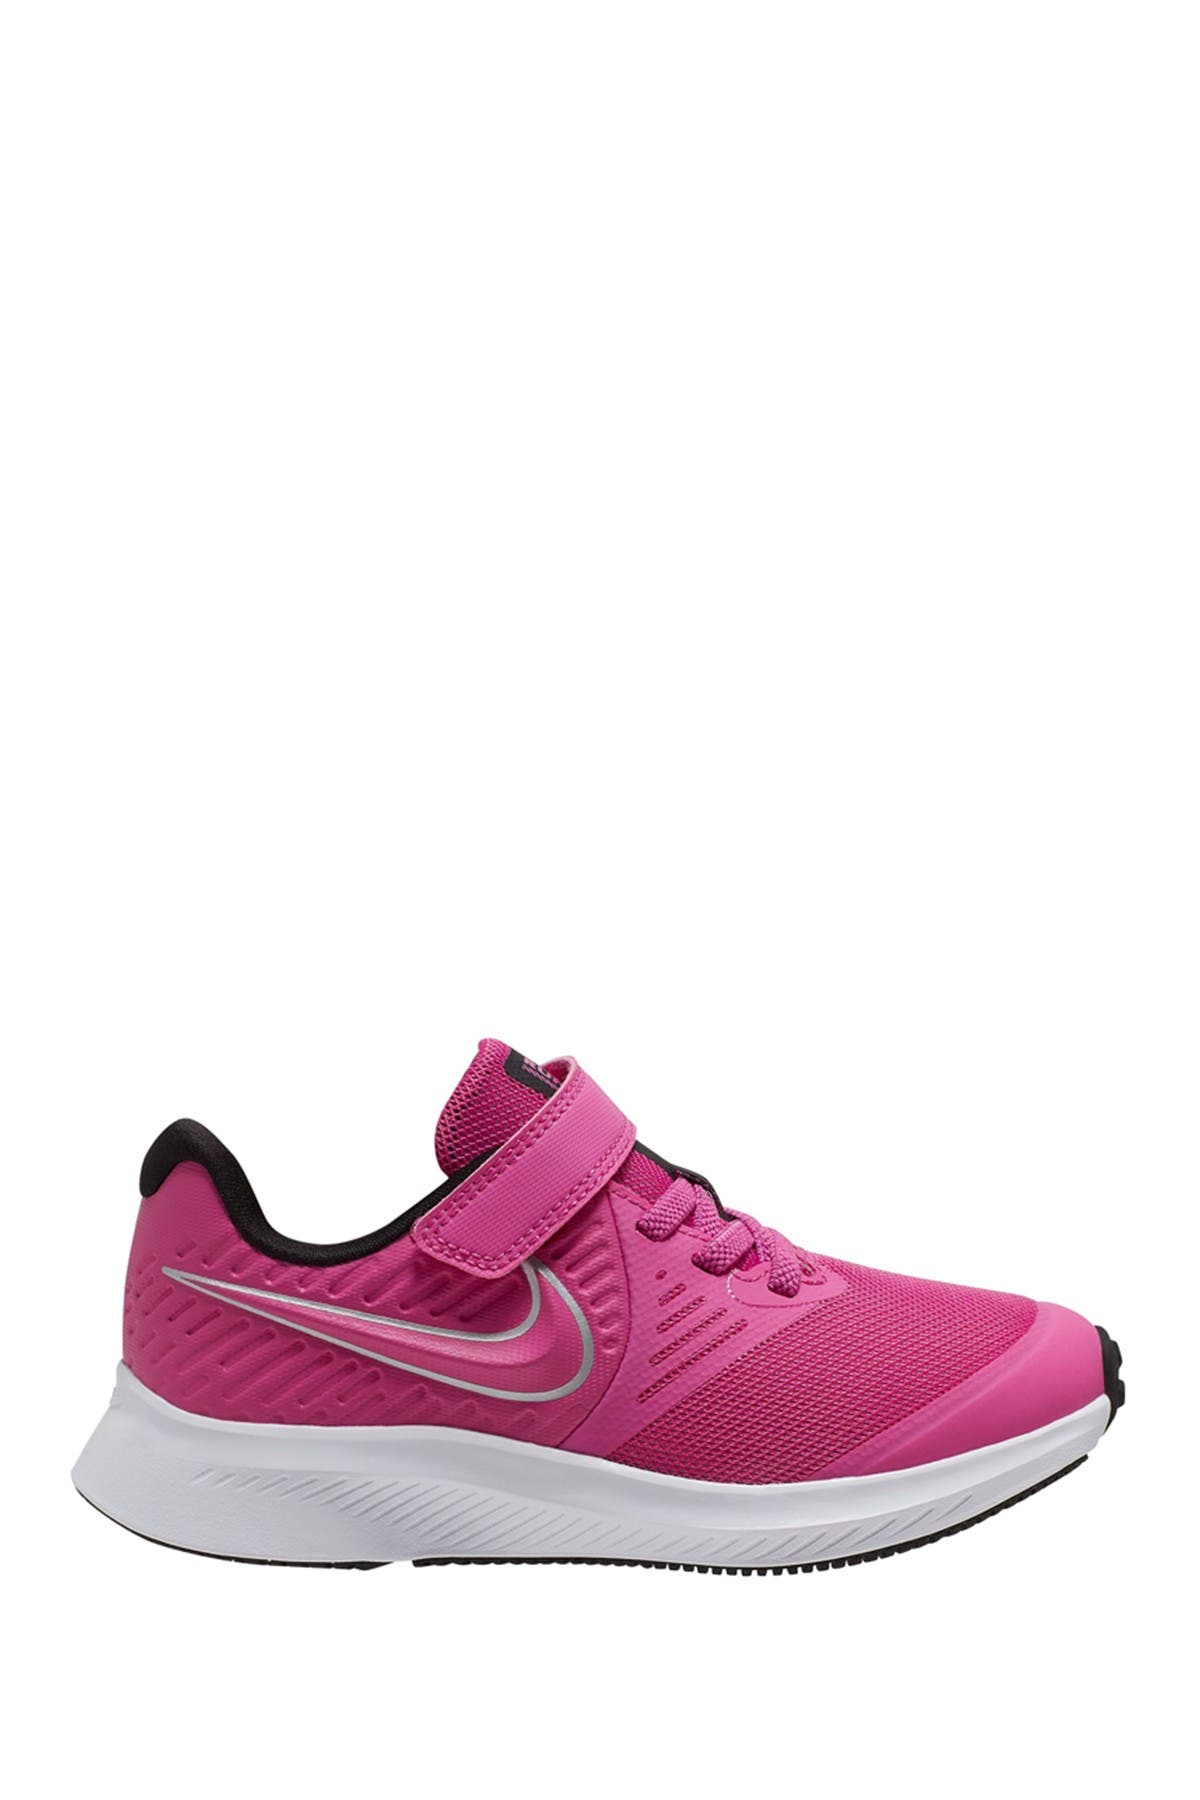 nordstrom youth shoes